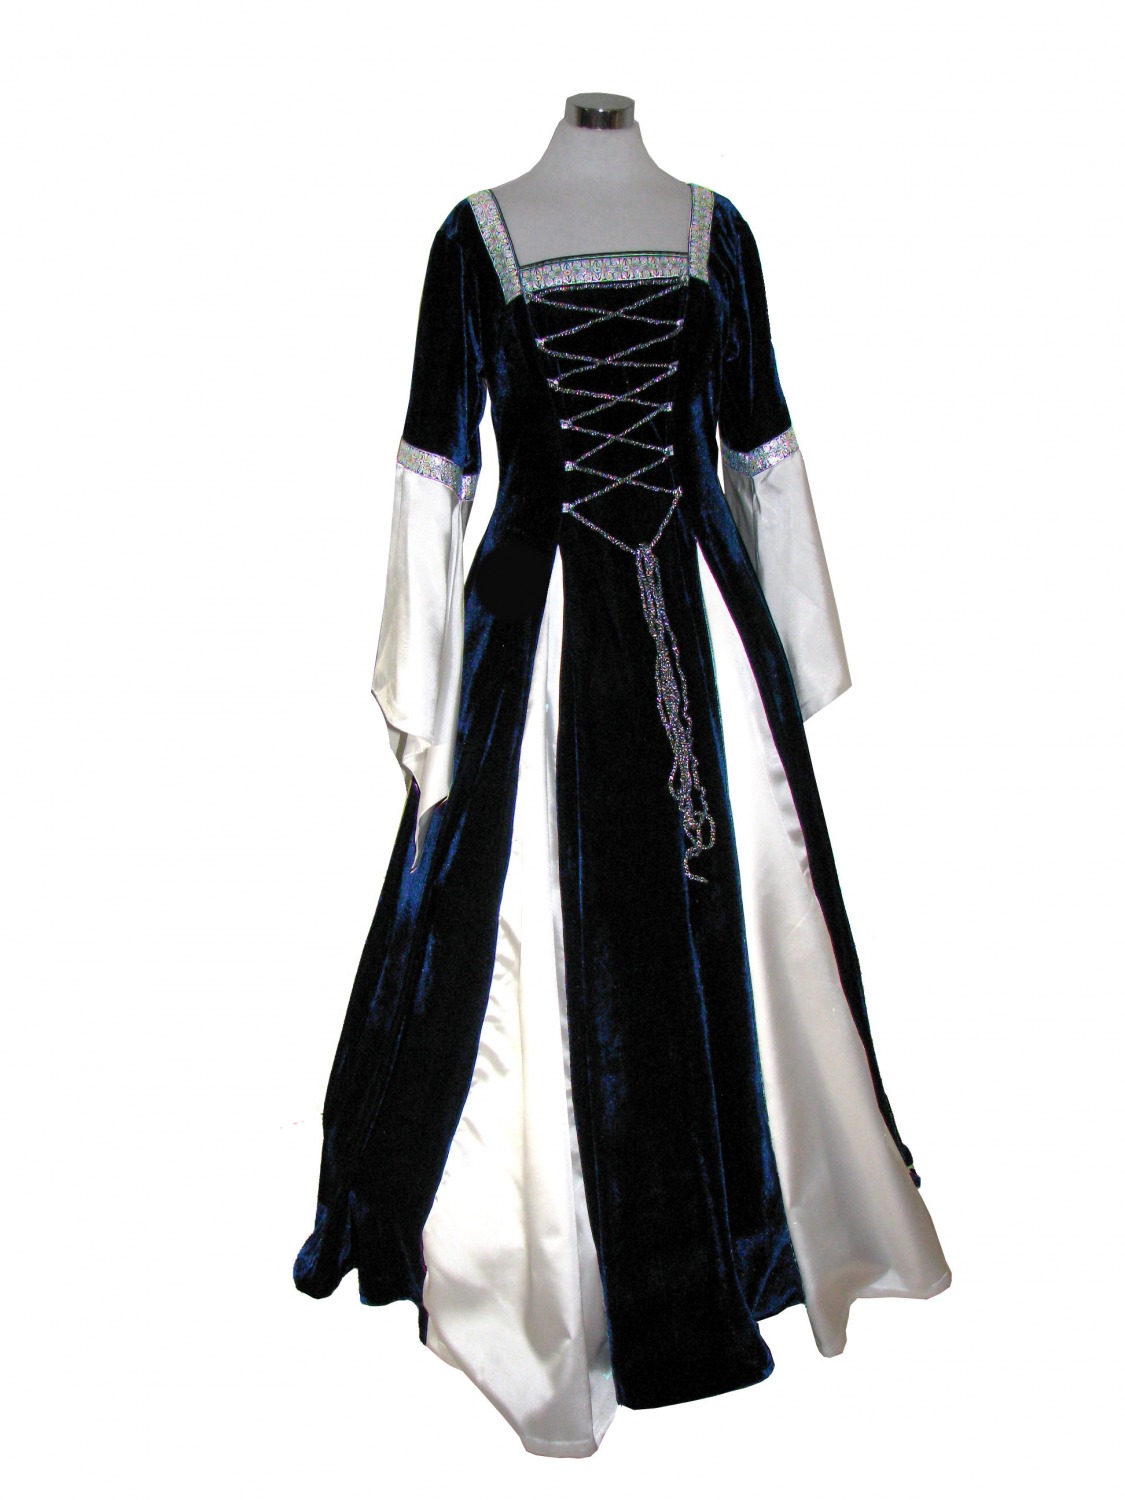 Ladies Deluxe Medieval Renaissance Costume and Headdress Size 8 - 12 ...